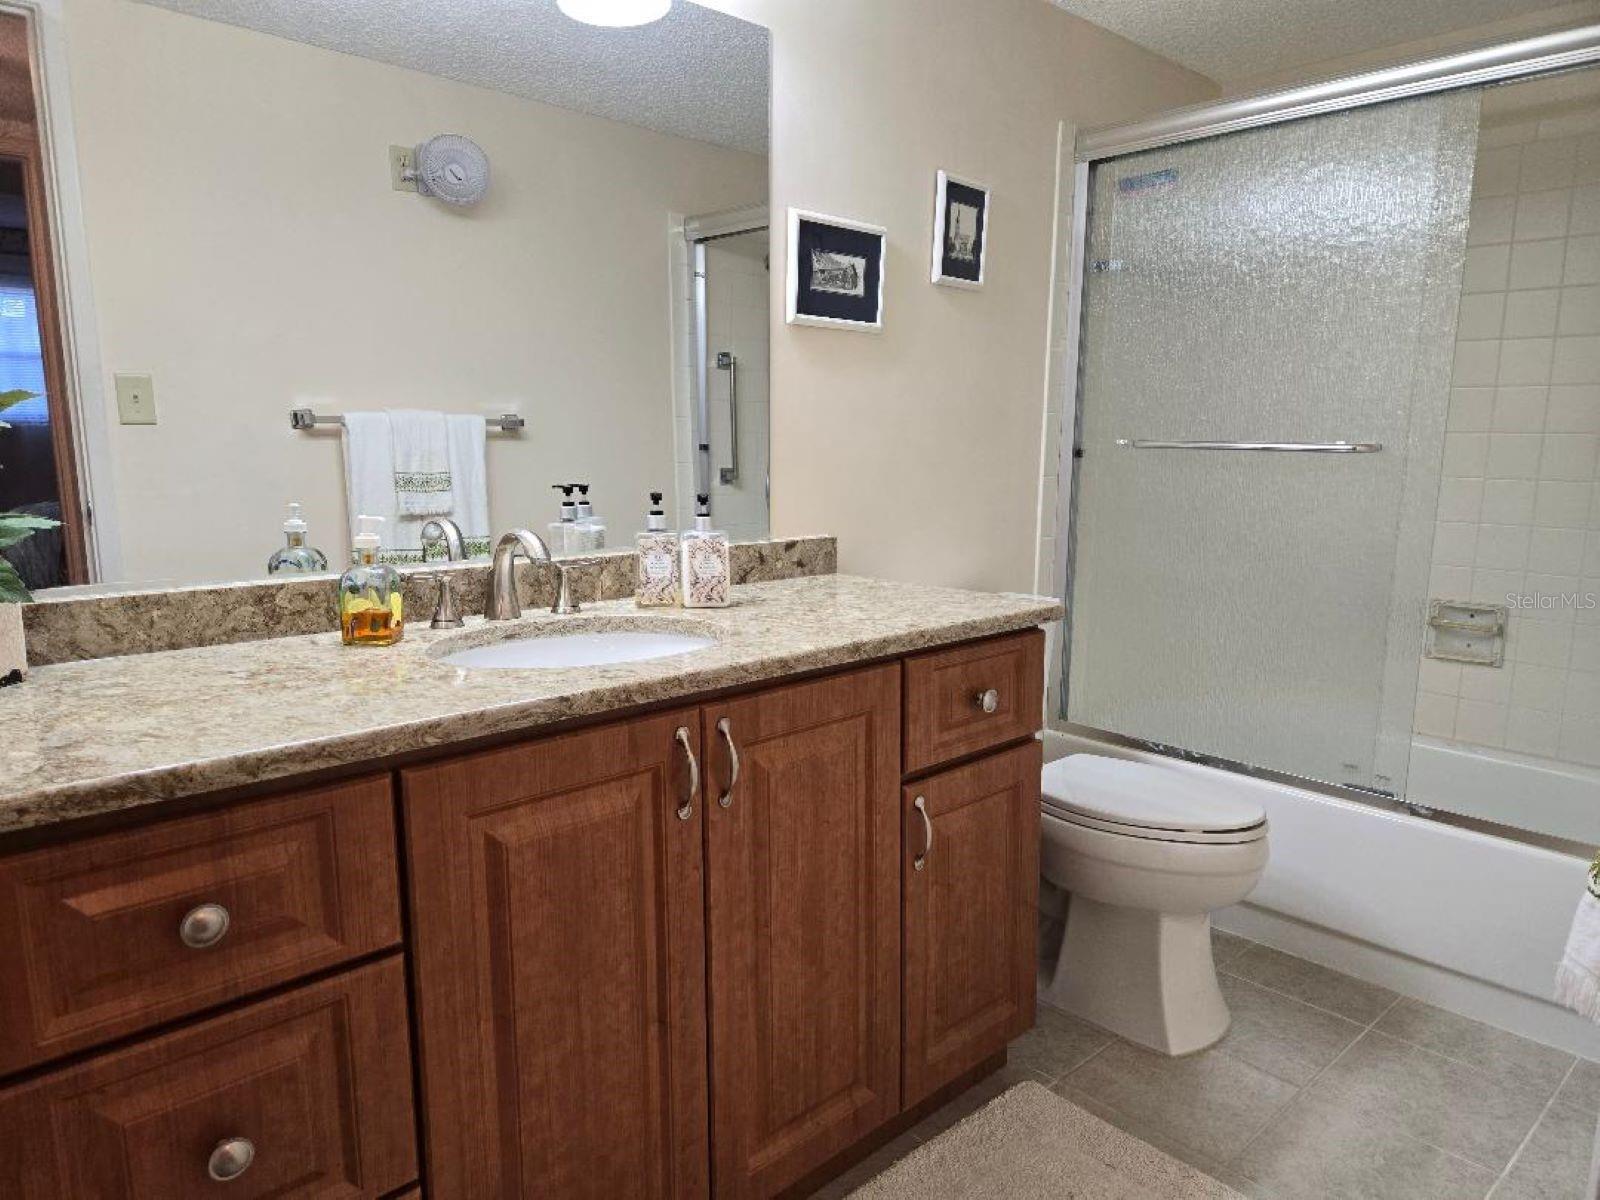 Bathroom #2 - Newer Vanity with updated sCounter and Sink.